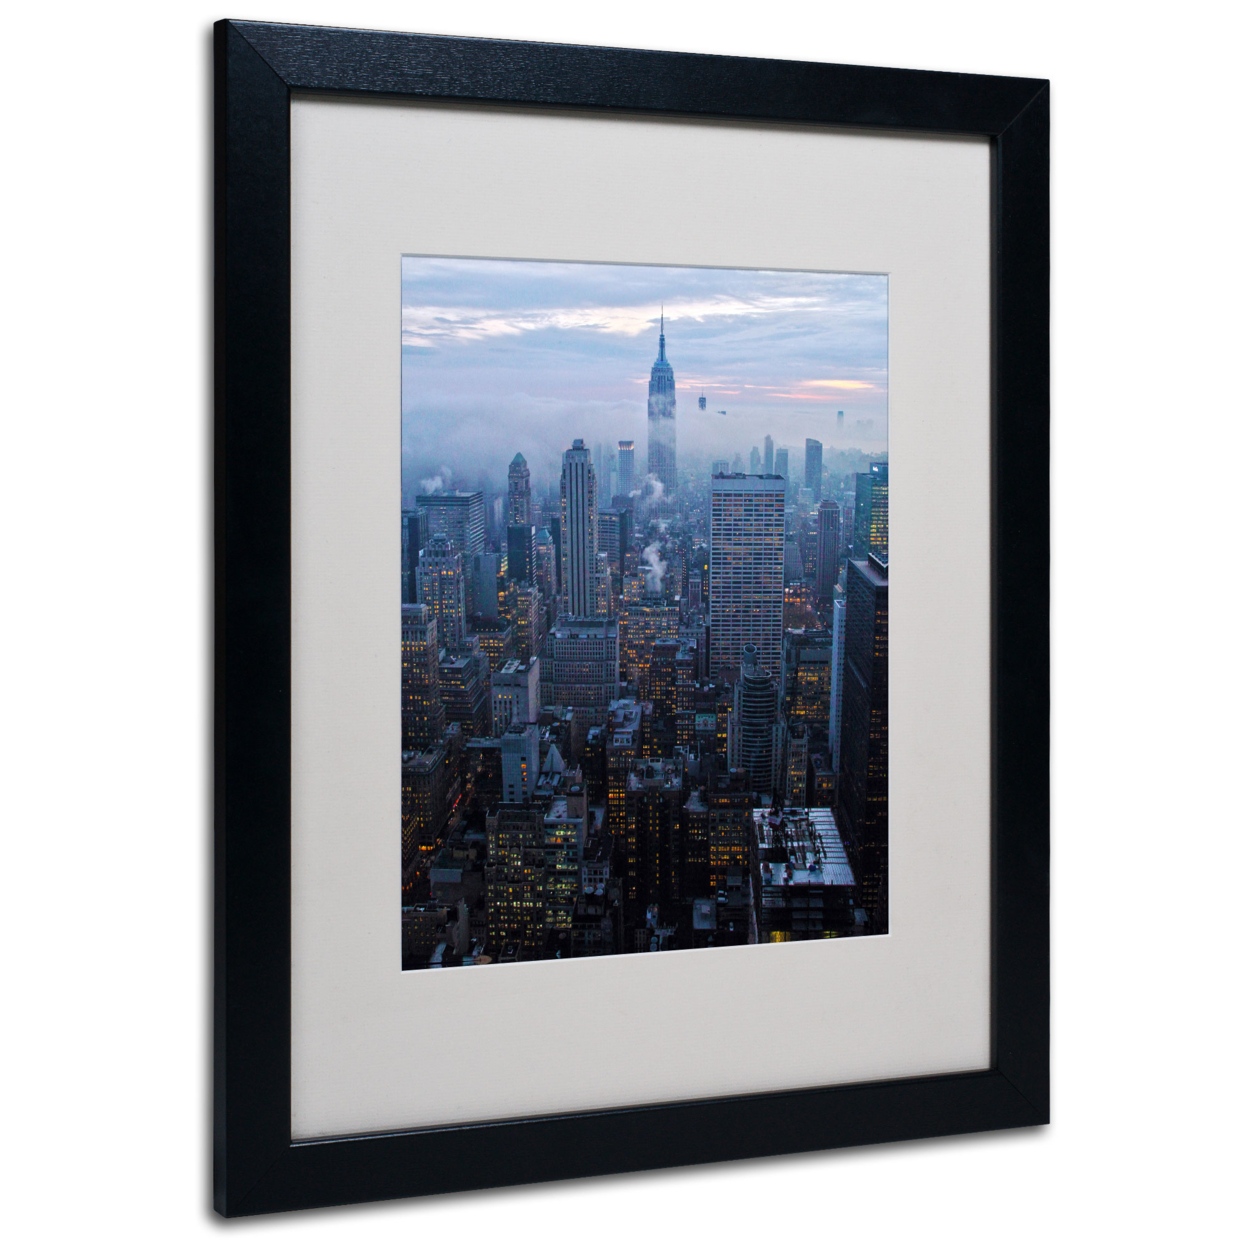 CATeyes 'City Lights' Black Wooden Framed Art 18 X 22 Inches